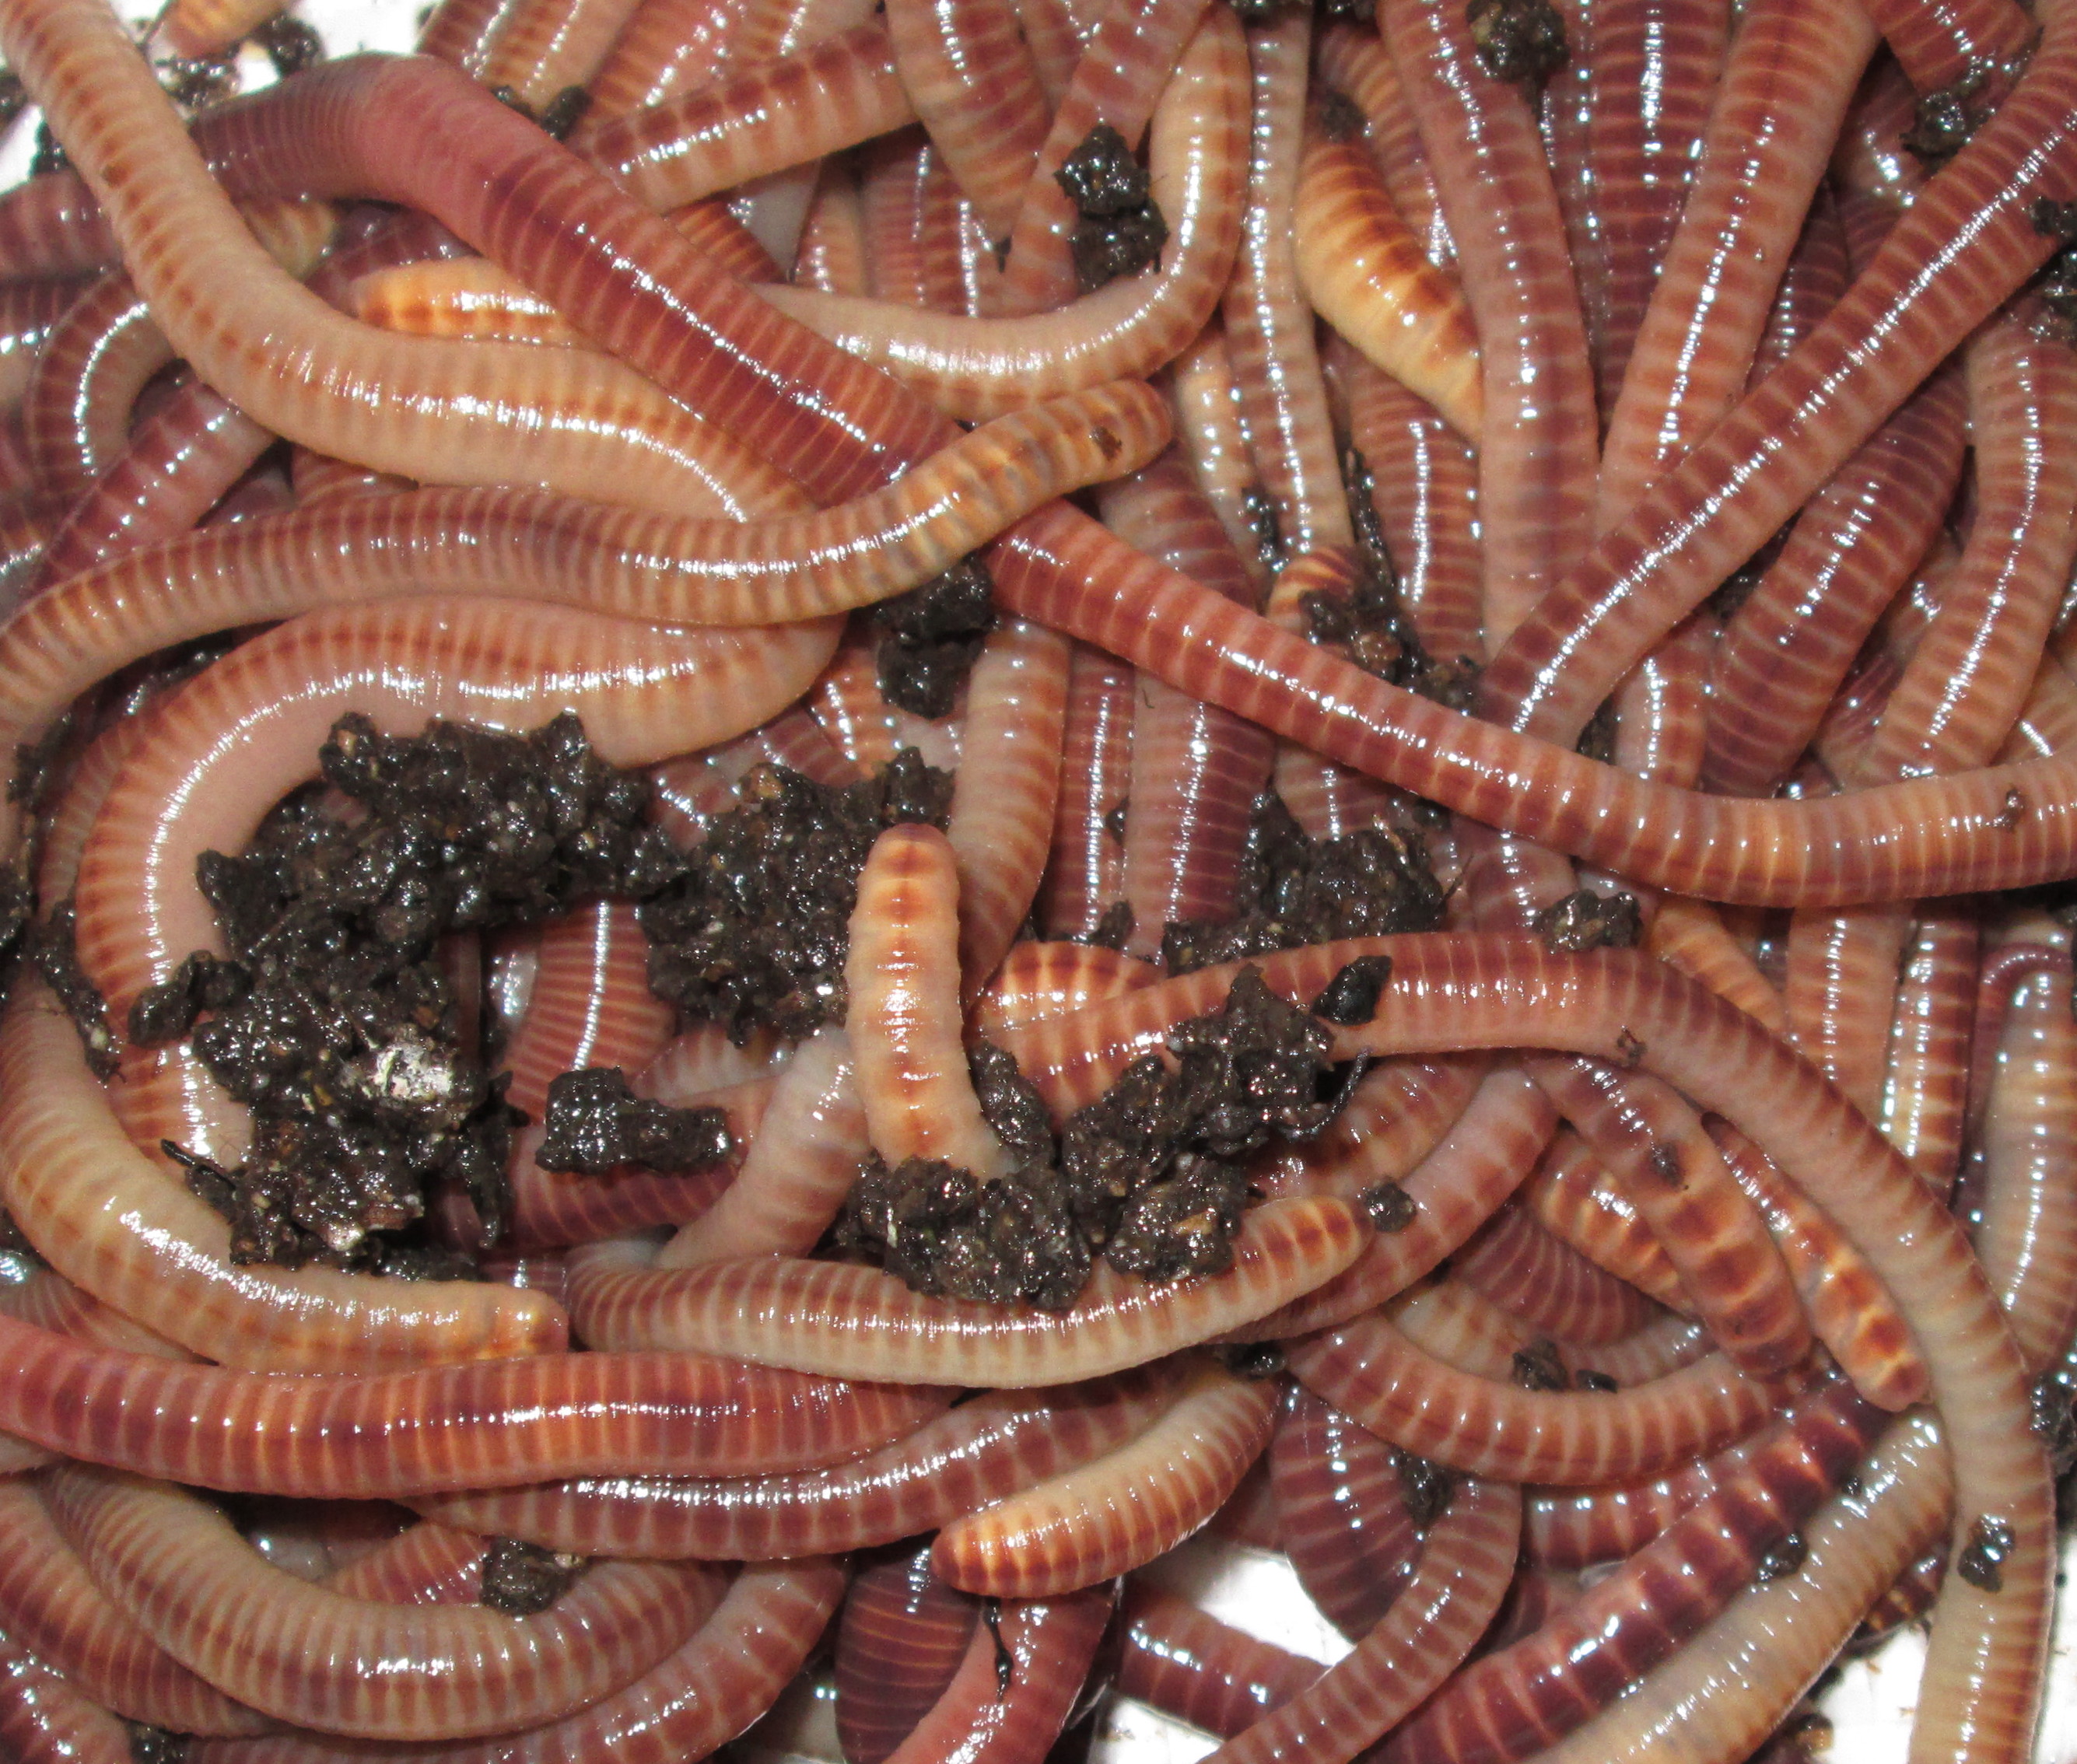 Cool Worms